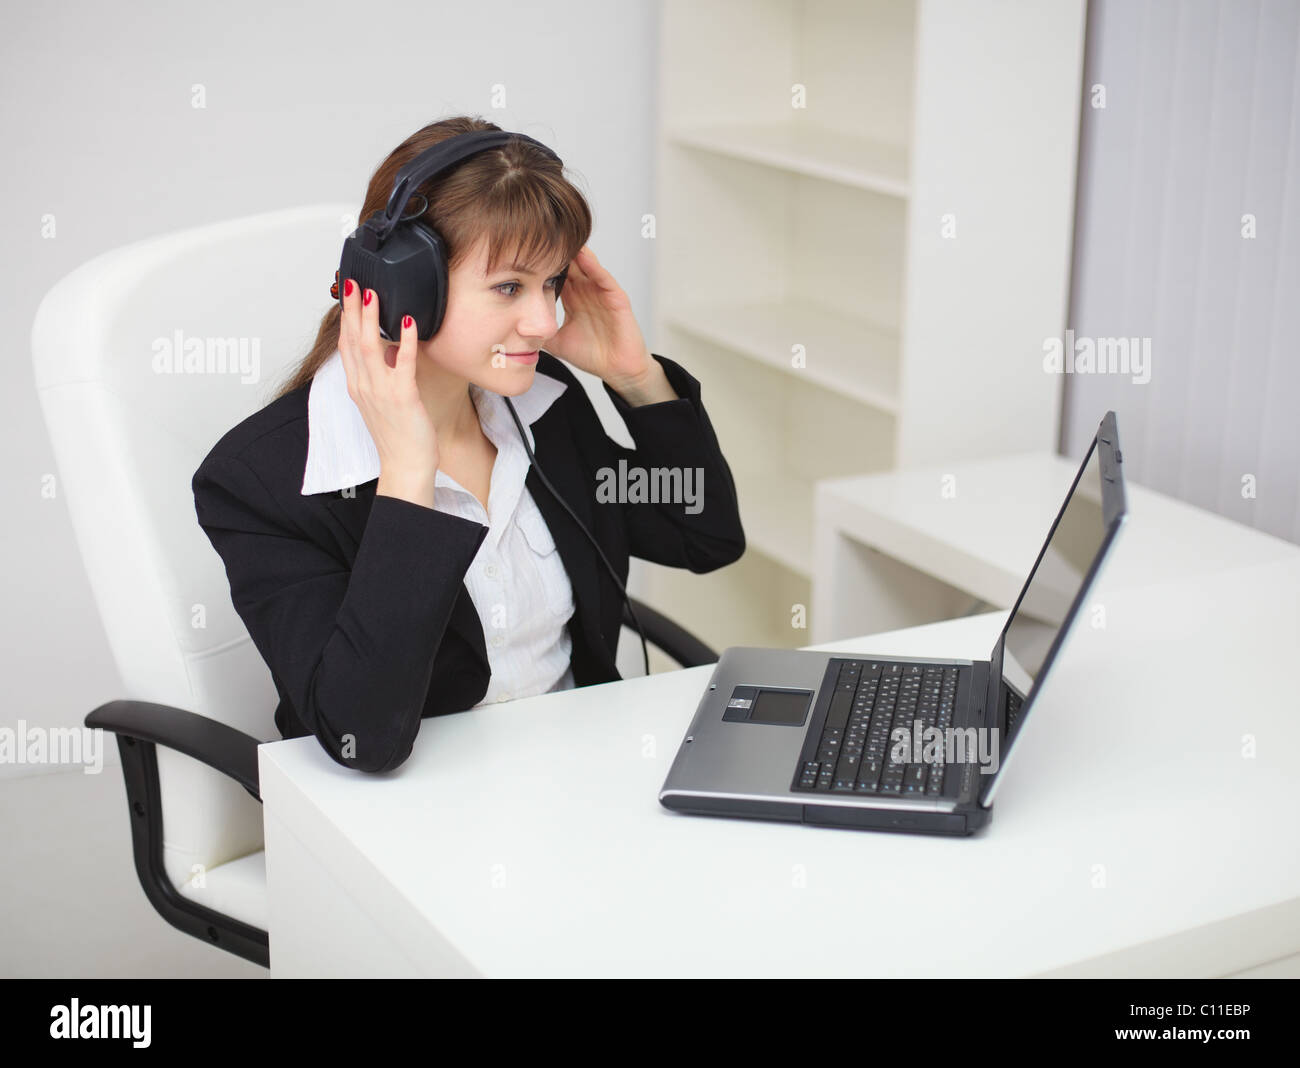 Woman listens to music by means of laptop and ear-phones Stock Photo